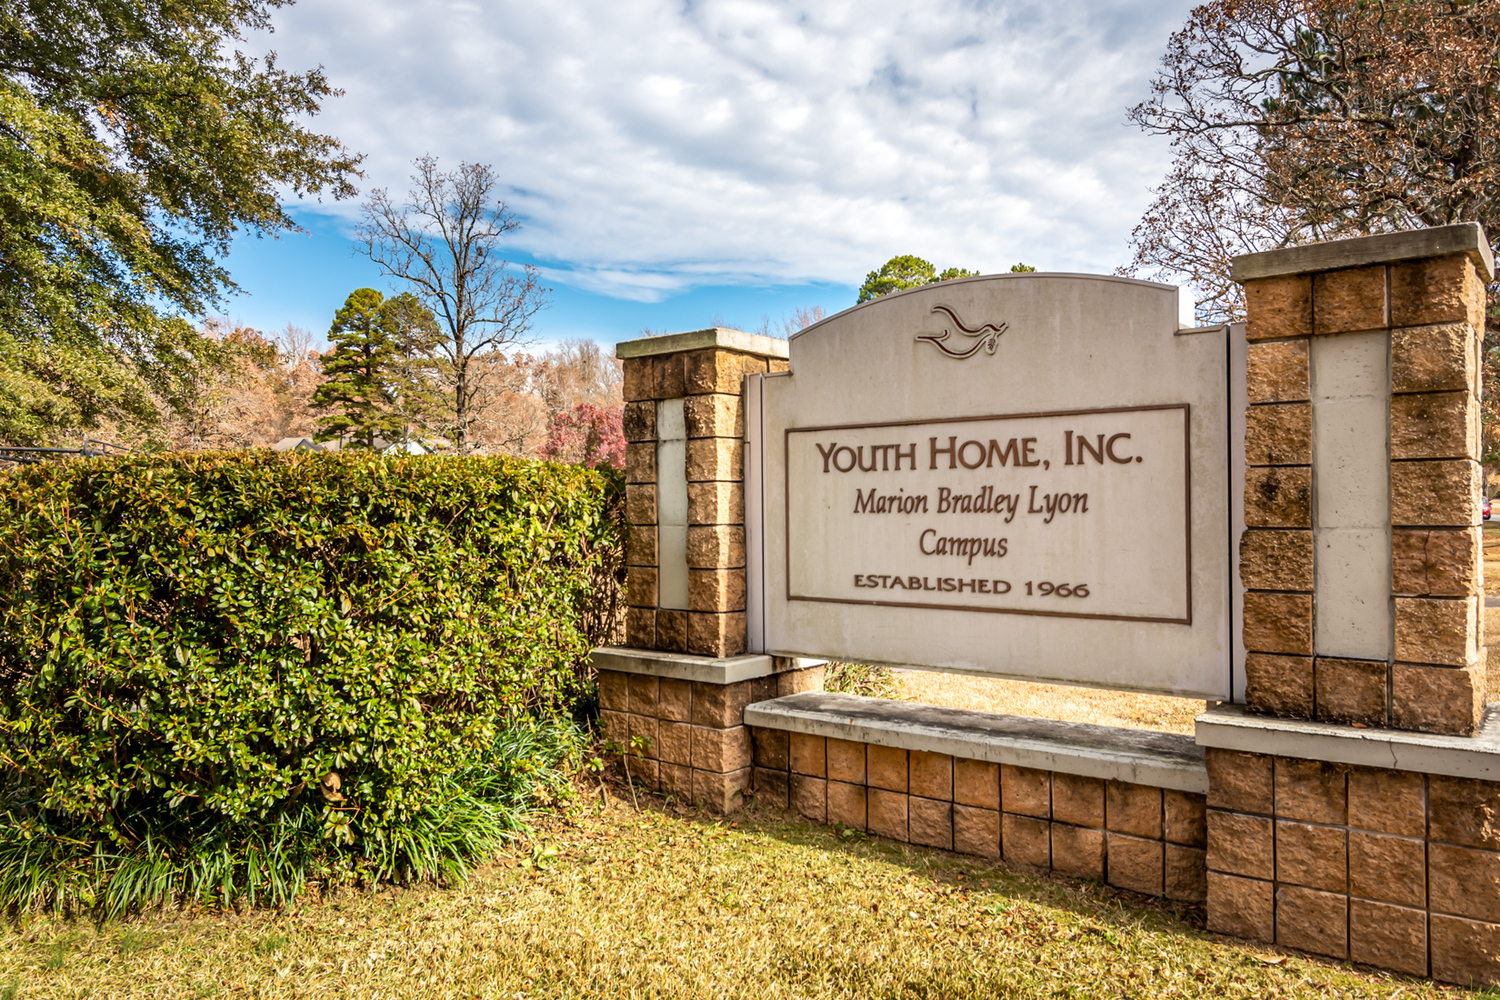 Gallery Photo of Youth Home Entrance Sign